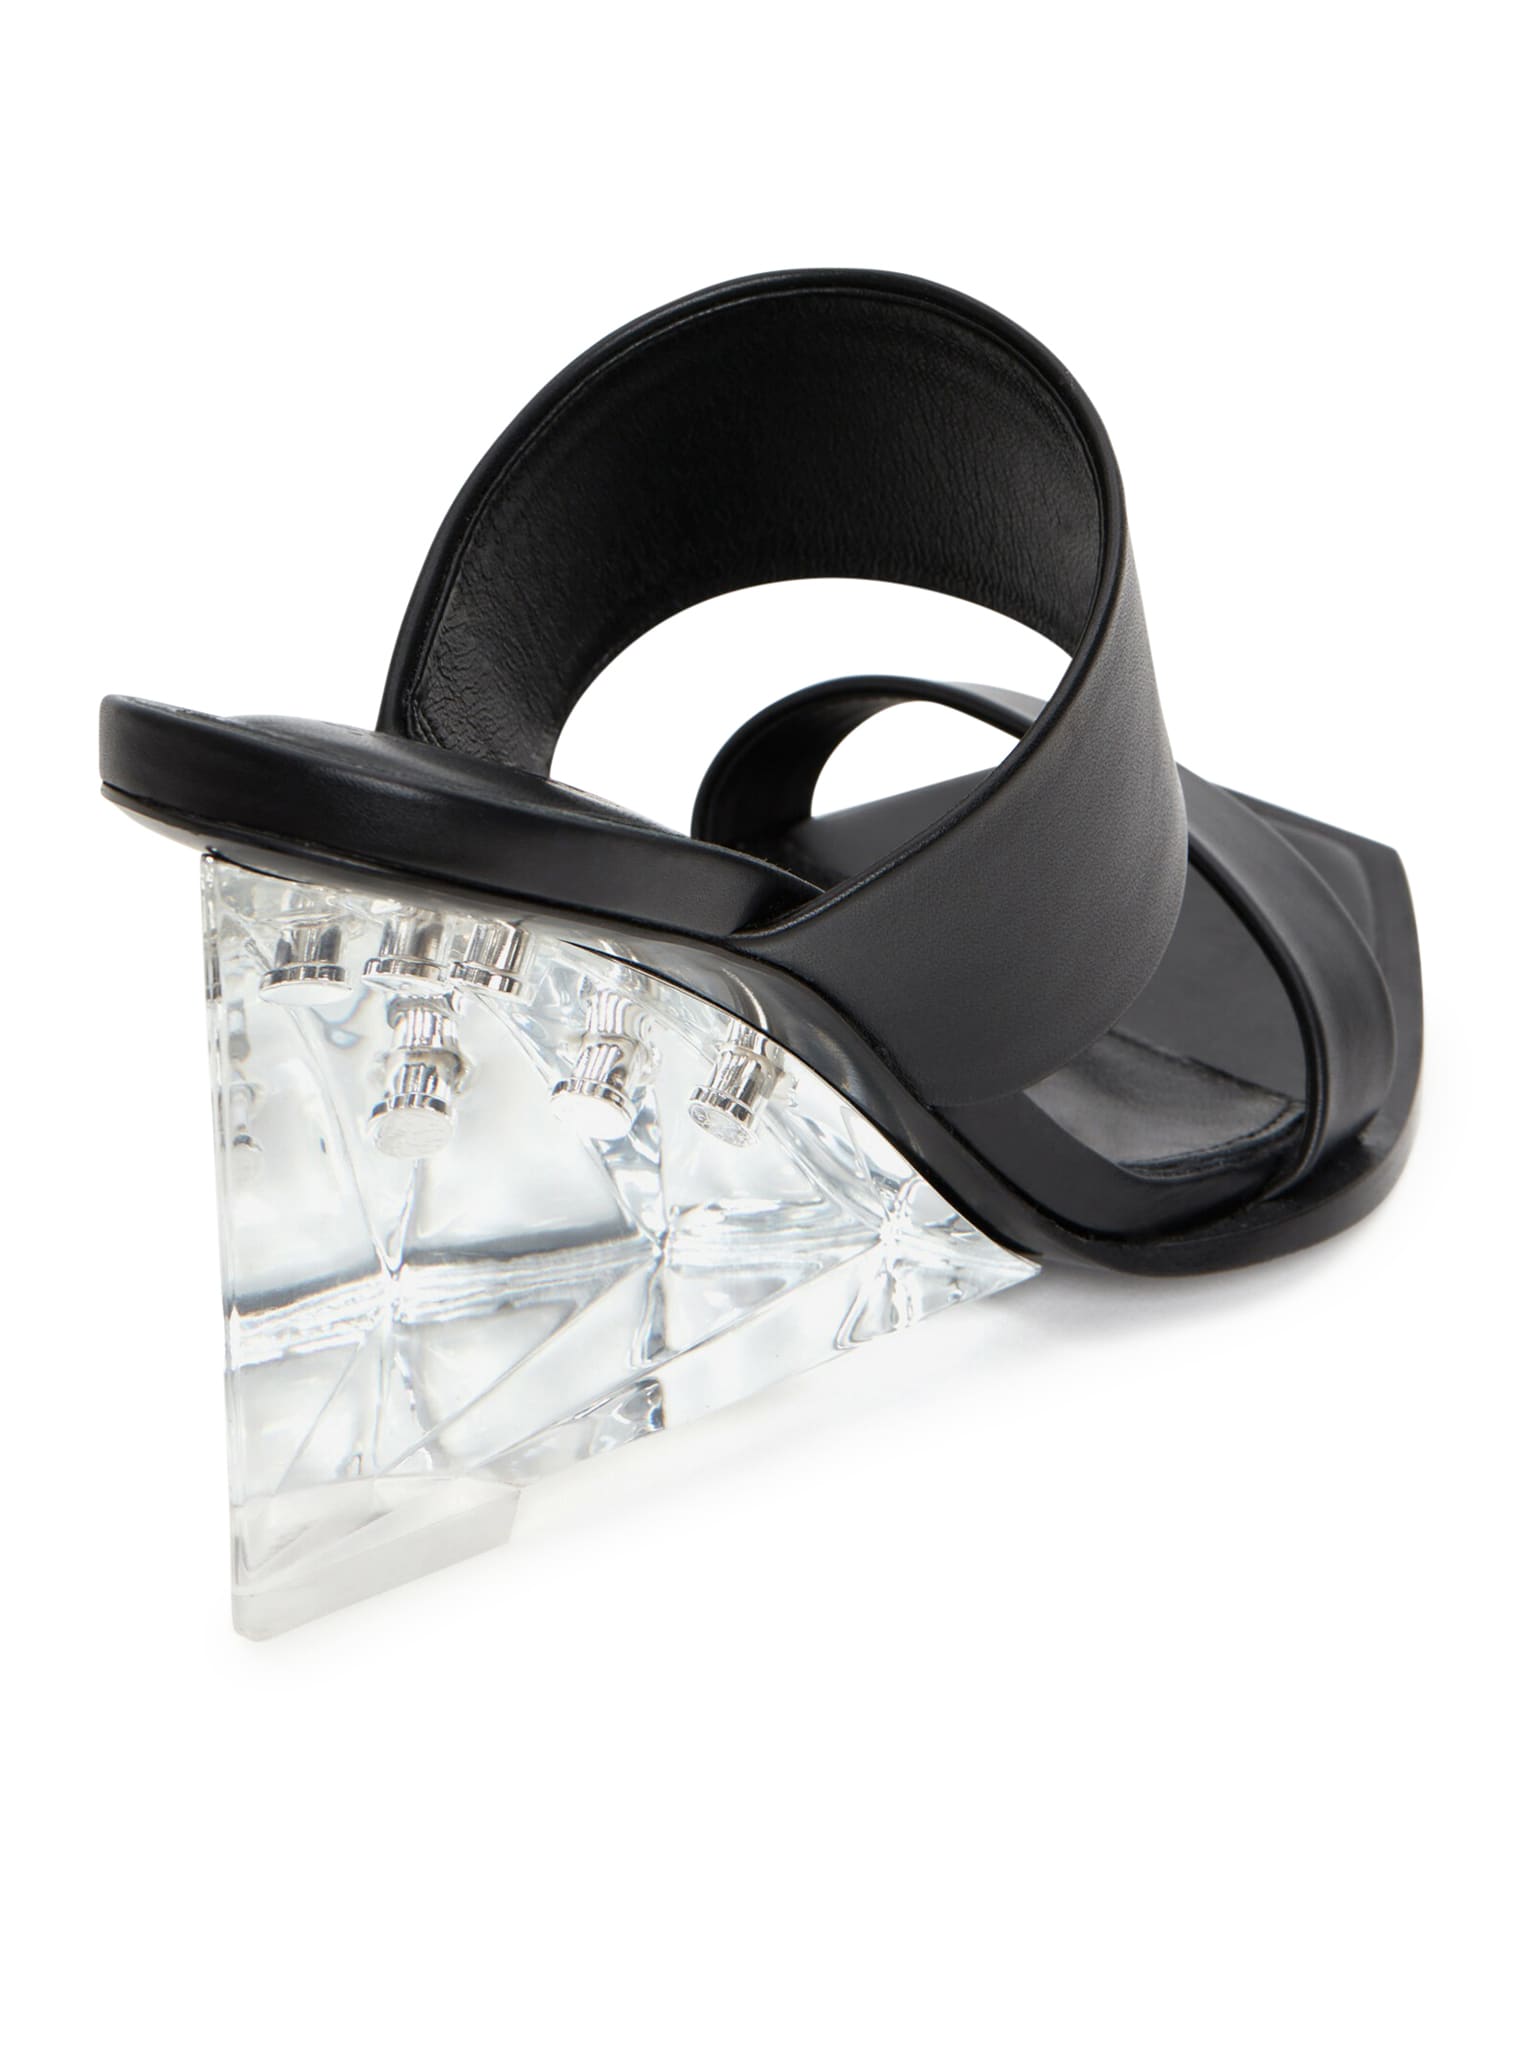 Shop Alexander Mcqueen Sandal New Lux Leather In Black